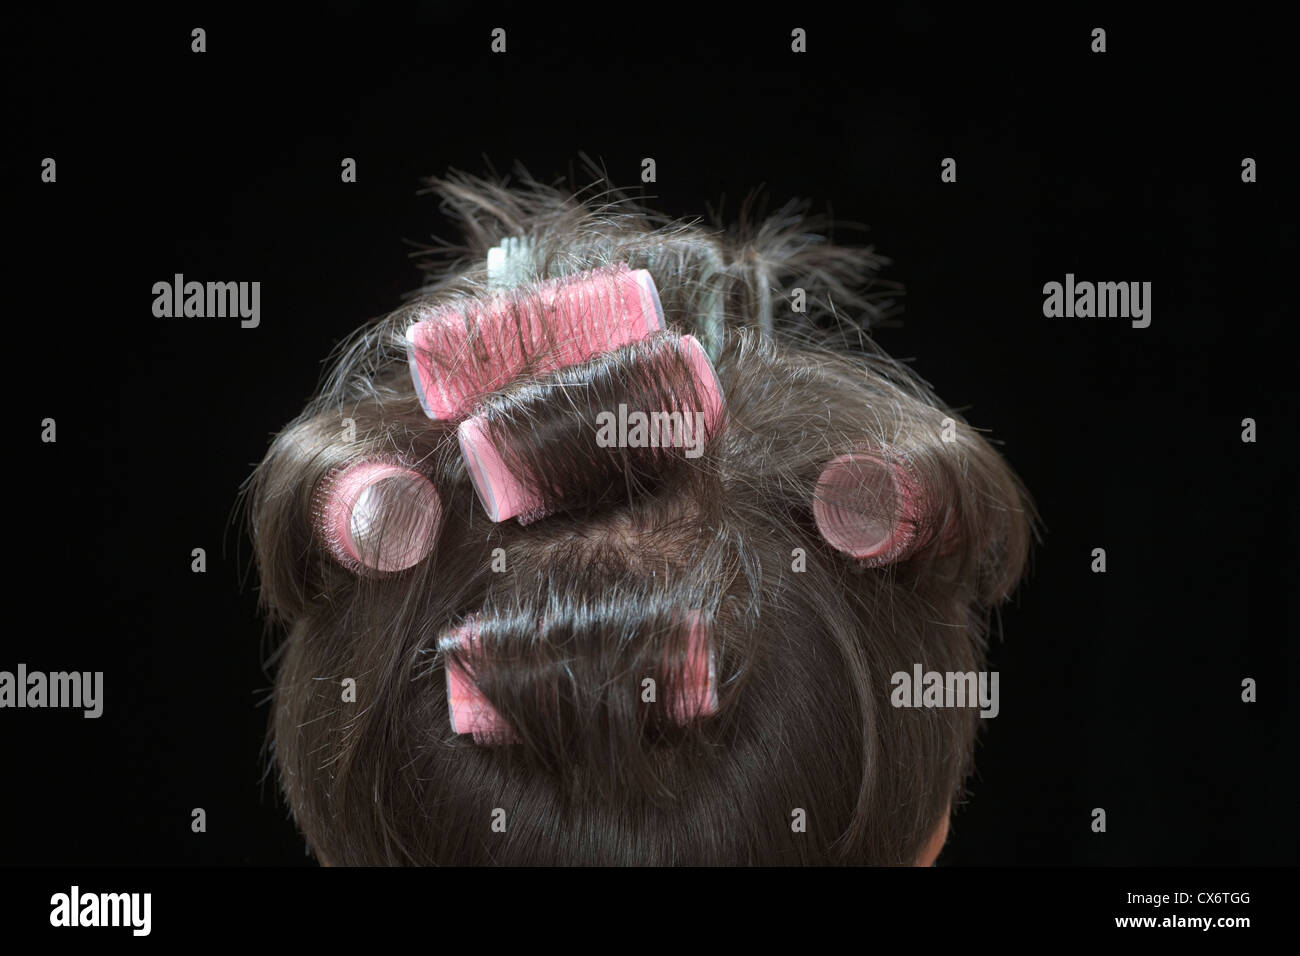 Rear view of a woman with curlers in her hair Stock Photo